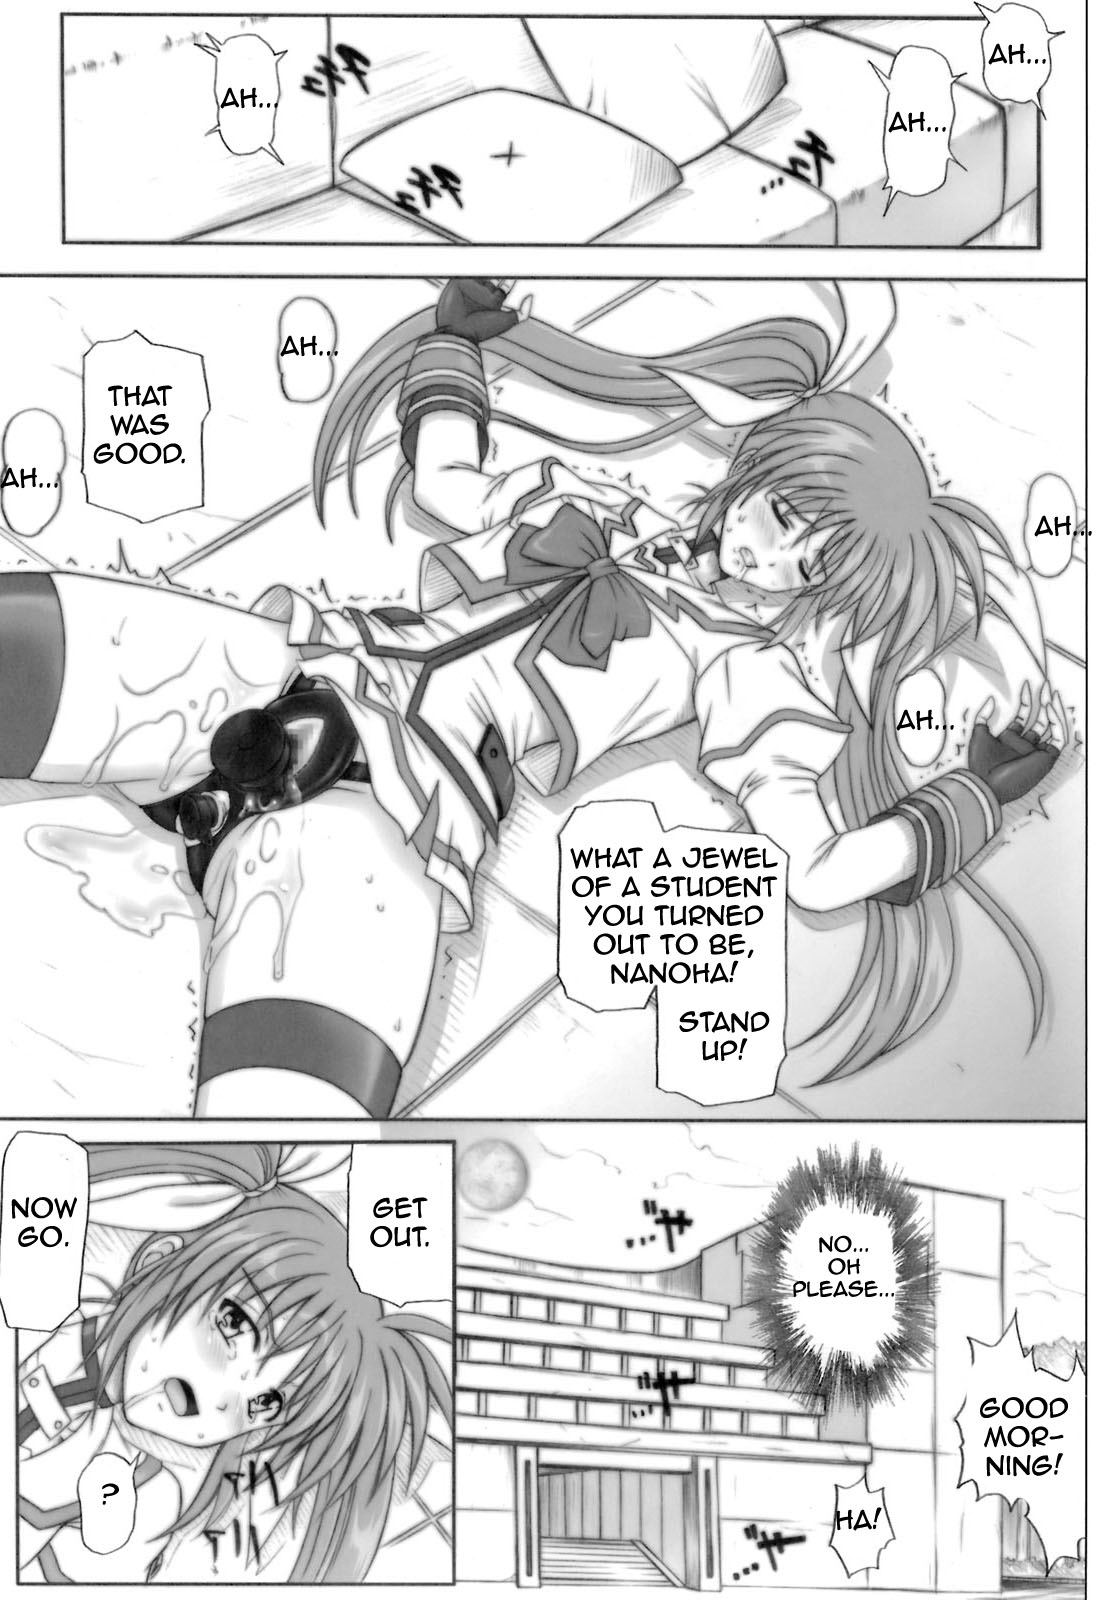 840 Color Classic Situation Note Extention (Mahou Shoujo Lyrical Nanoha) [English] [Rewrite] page 13 full